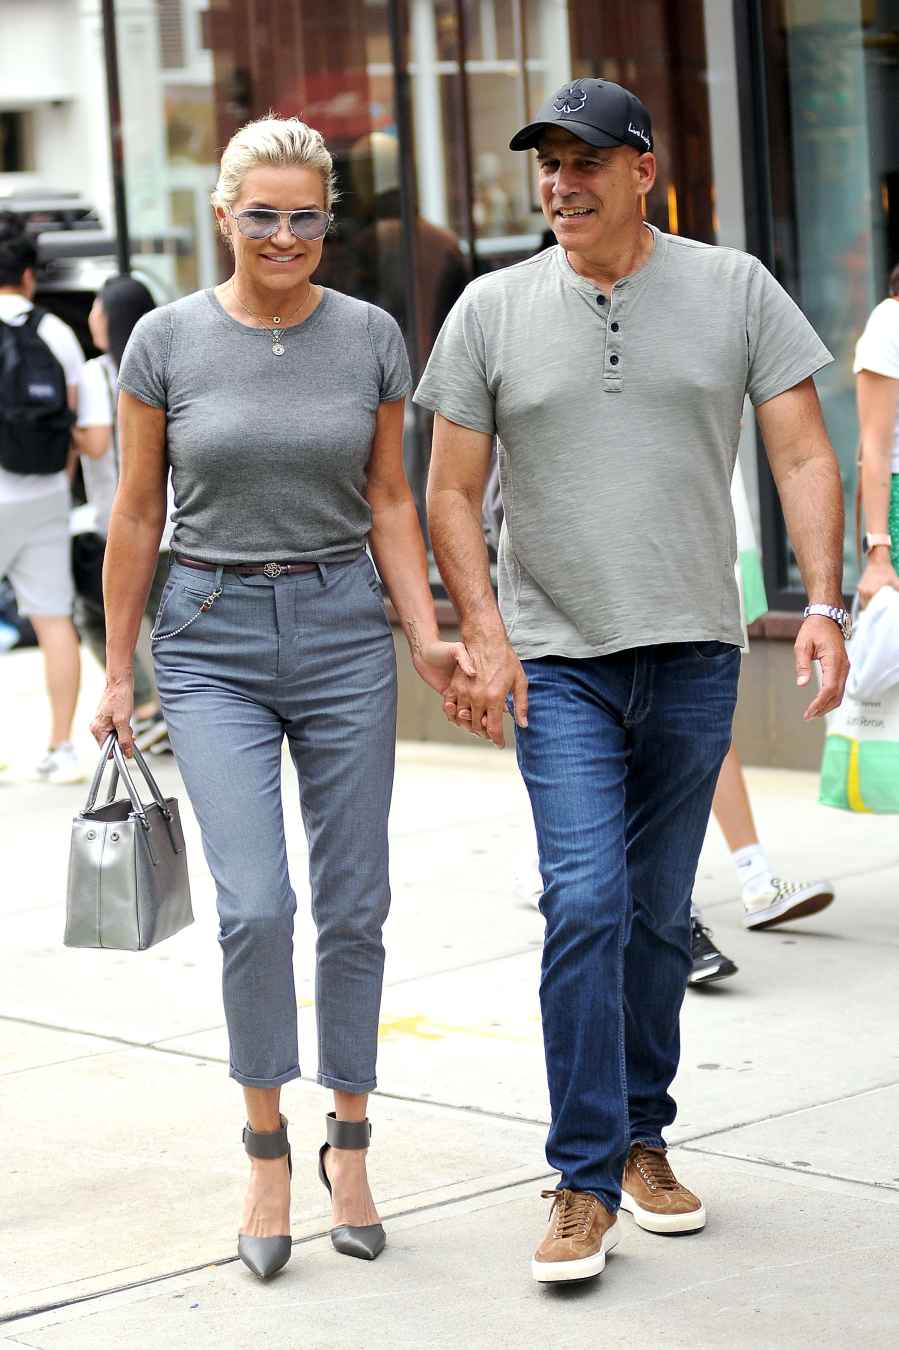 Yolanda Hadid Holds Hands With Mystery Man 1 Month After Ex David Foster’s Wedding